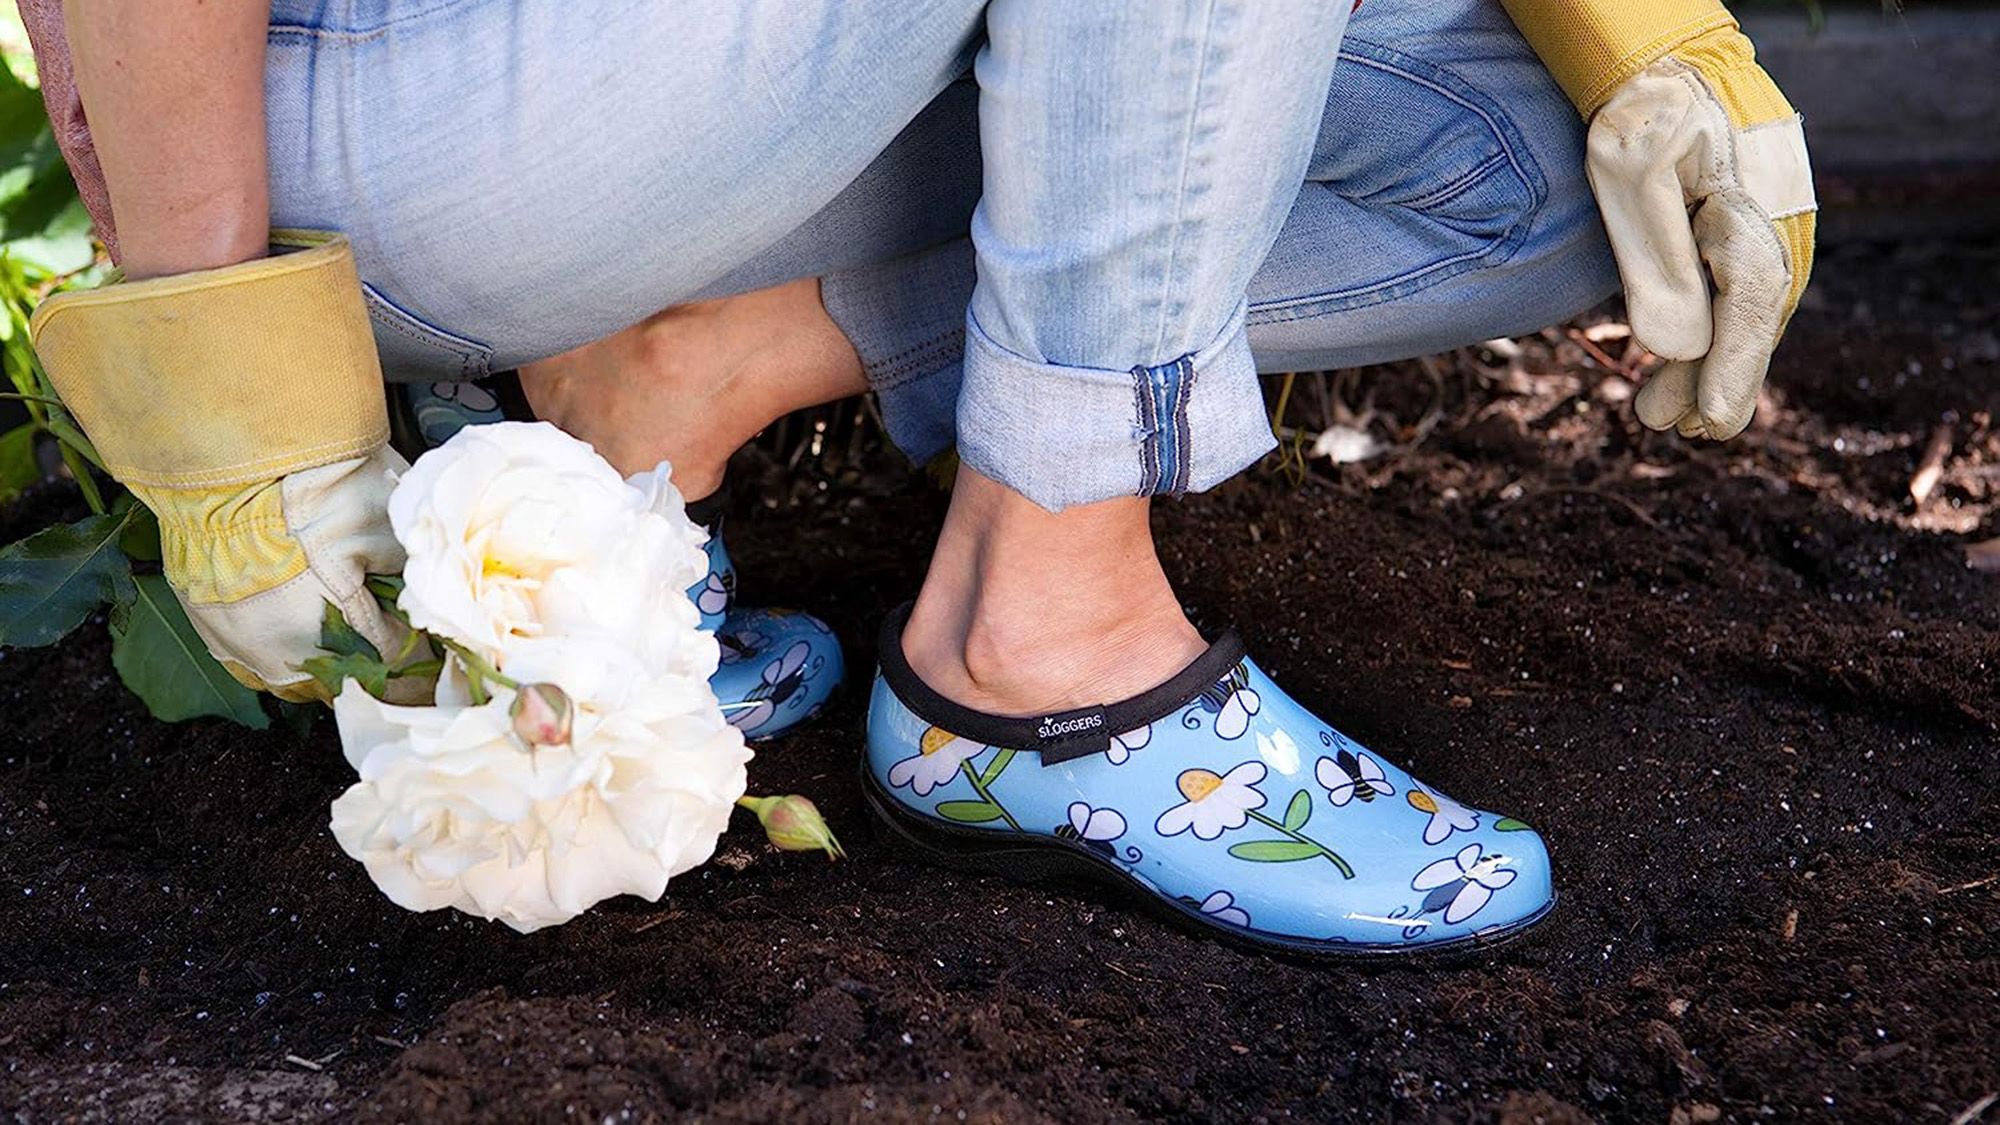 21 Best Gardening Shoes, Hats, Clothes, Accessories